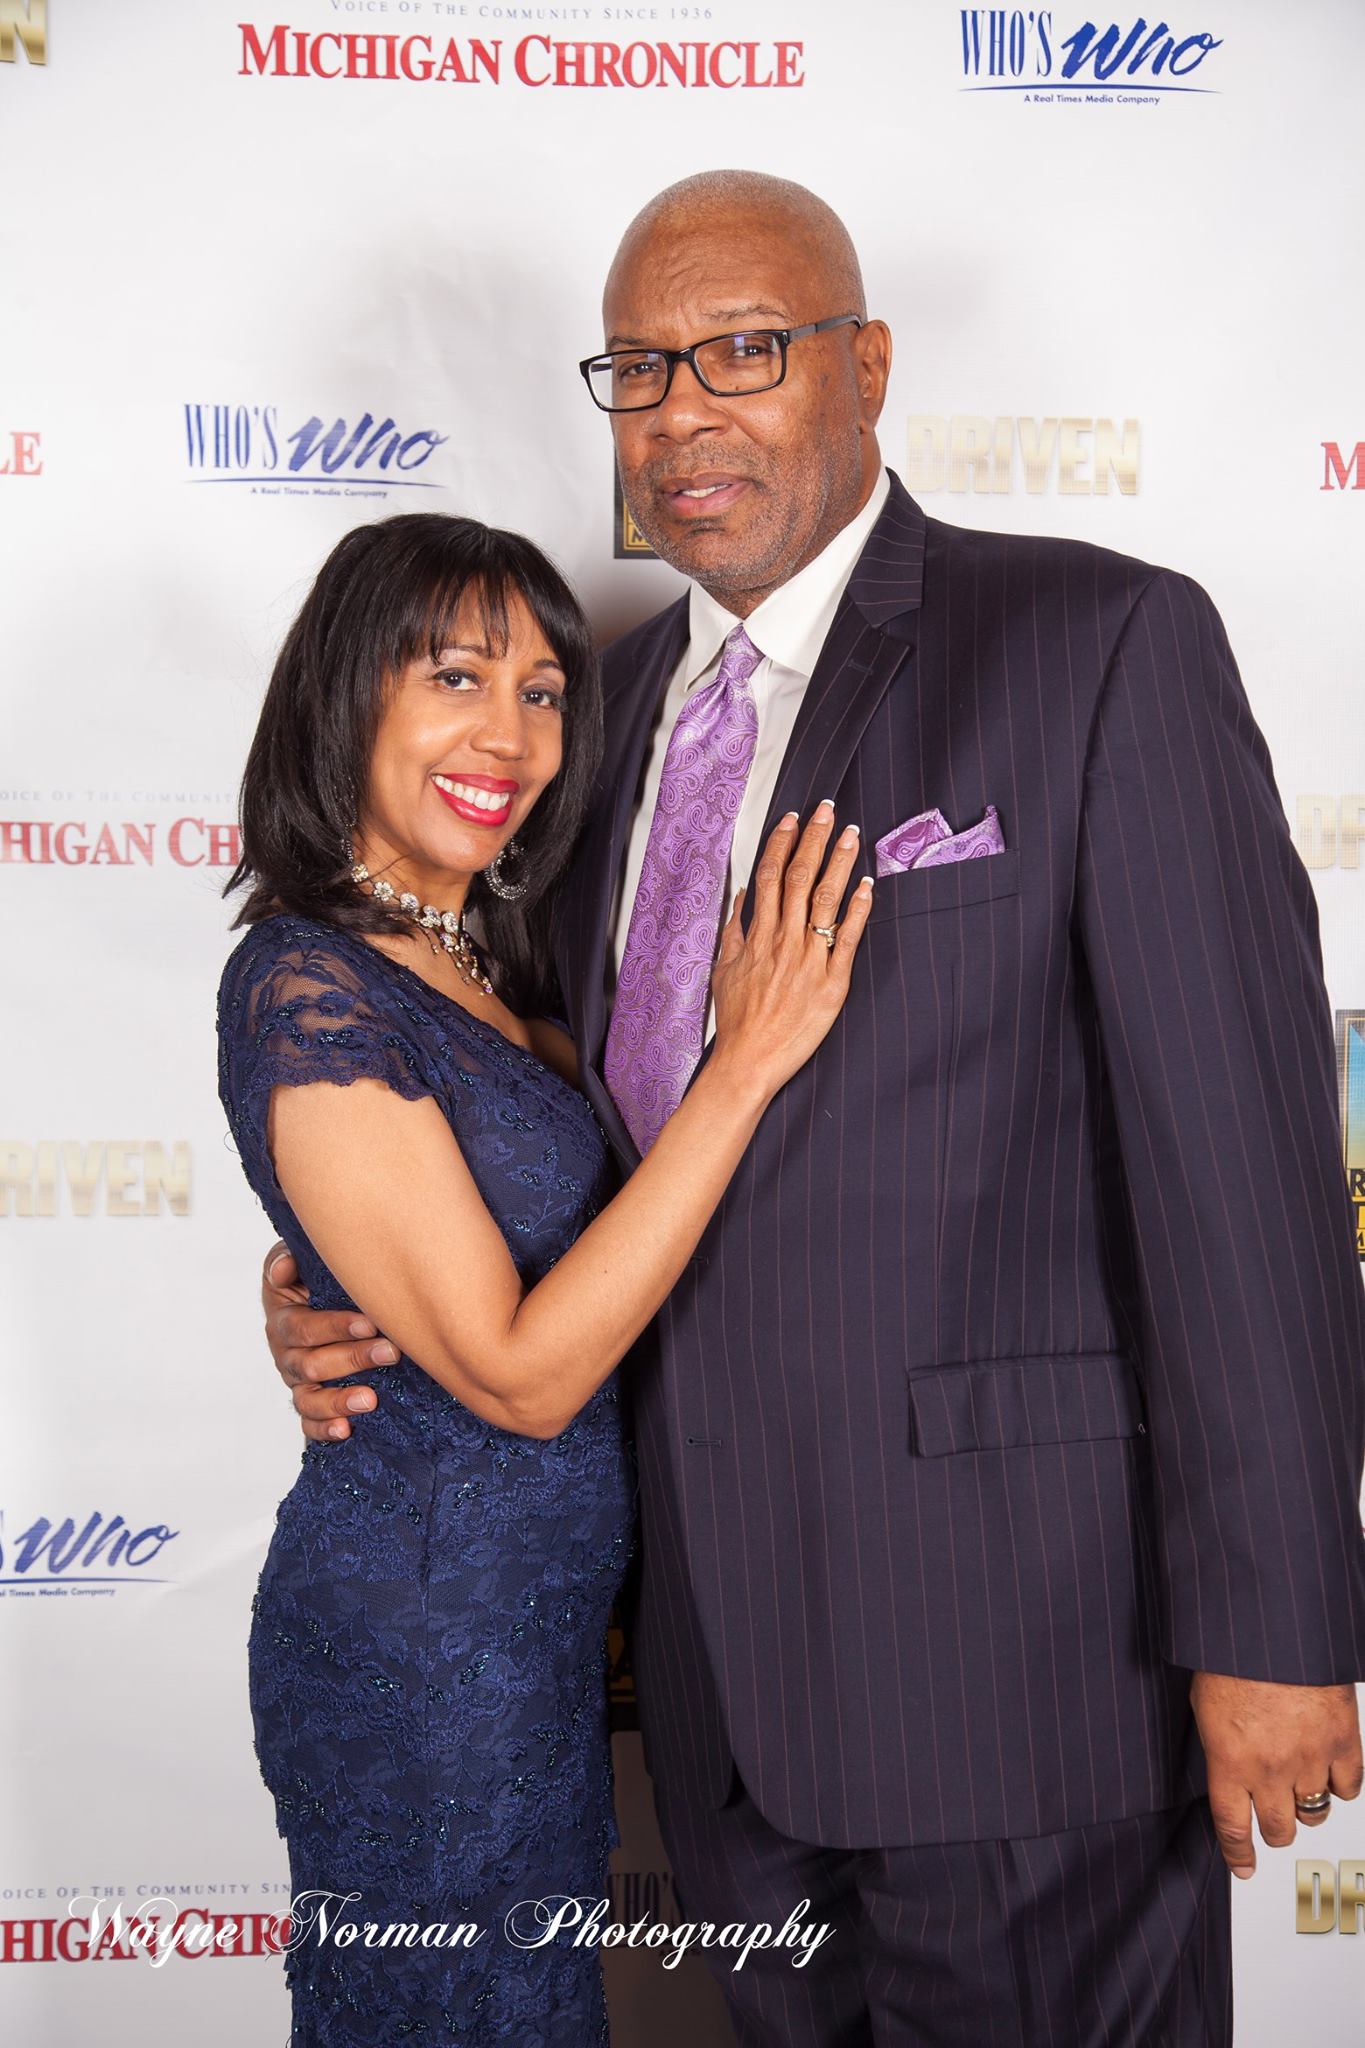 Grover and Karen McCants at NAIAS Driven Event in Detroit, Michigan January 14, 2015 at Garden Theater